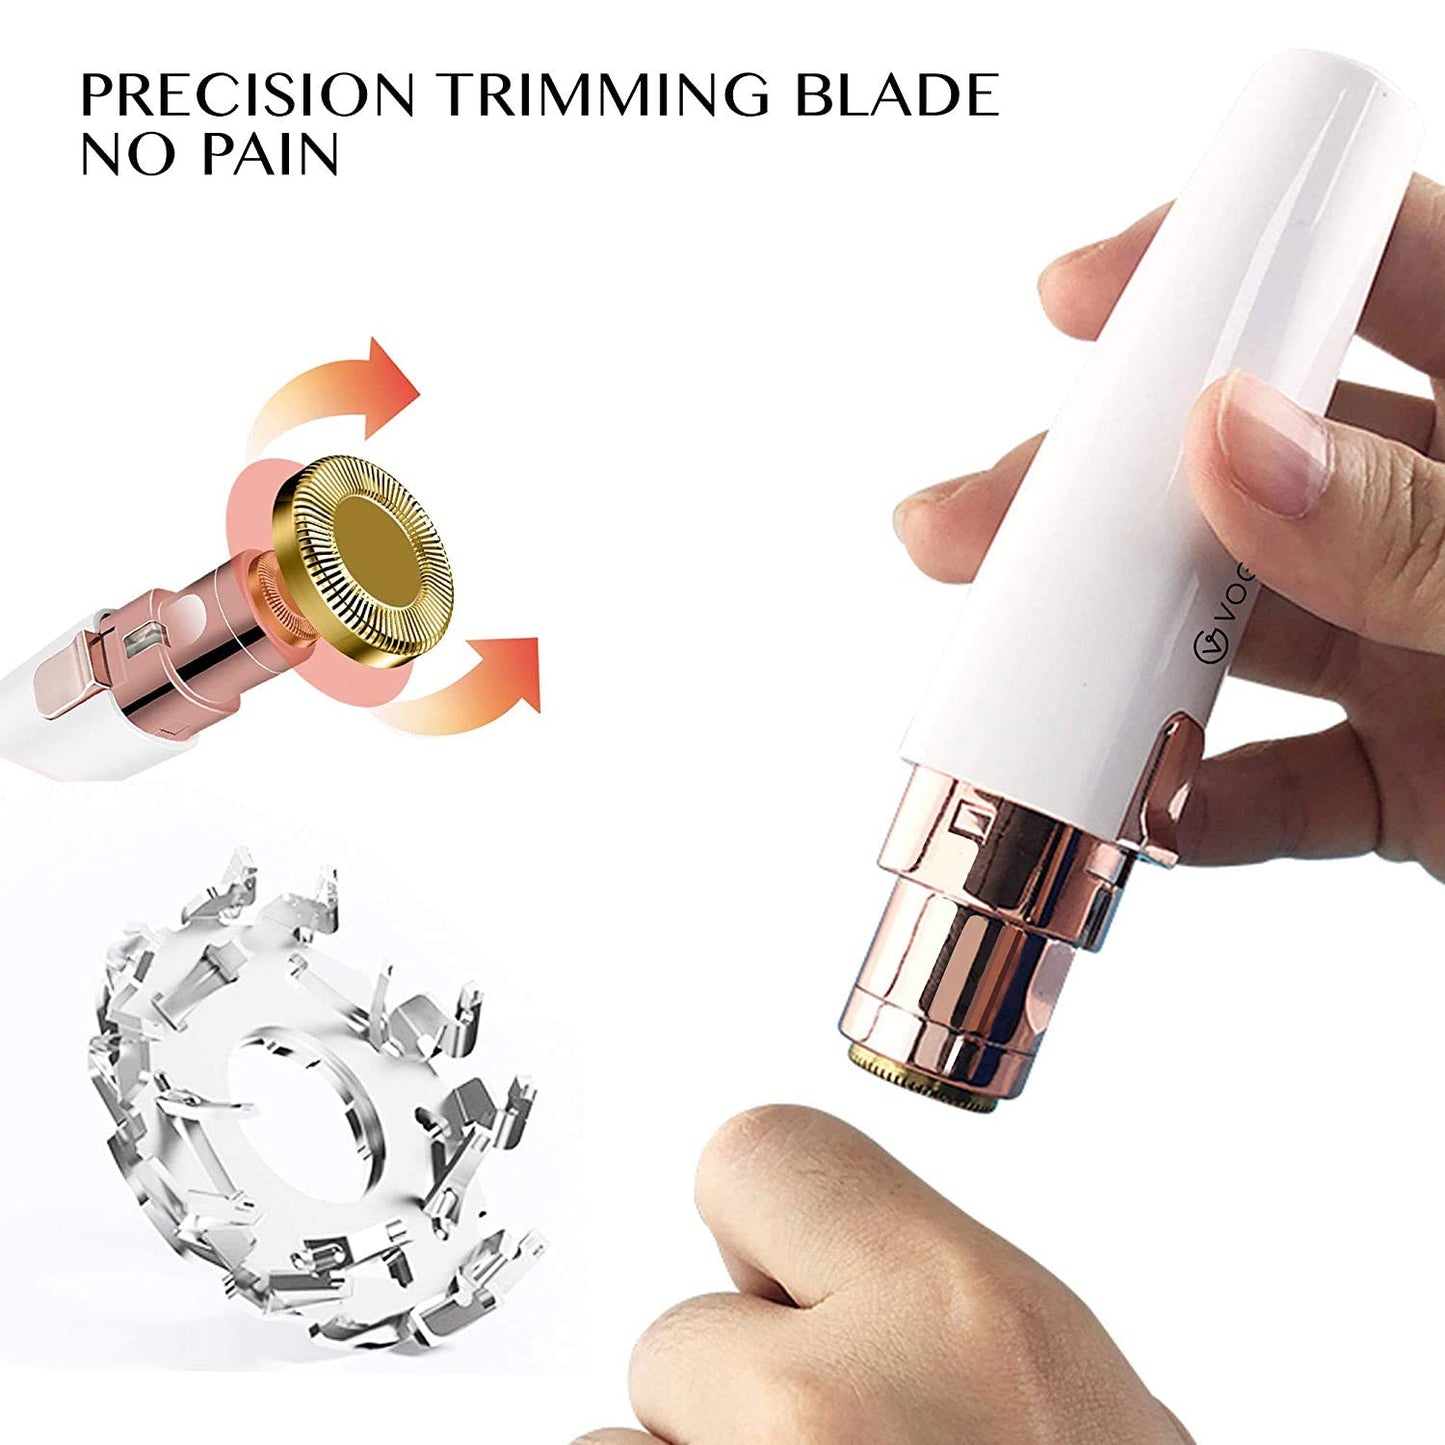 VG VOGCREST Rechargeable Eyebrow Trimmer & Facial Hair Remover for Women, 2 IN 1 Eyebrow Razor and Flawless Hair Remover, Eyebrow Lips Nose Body Facial Hair Removal for Women with Built-in LED Light